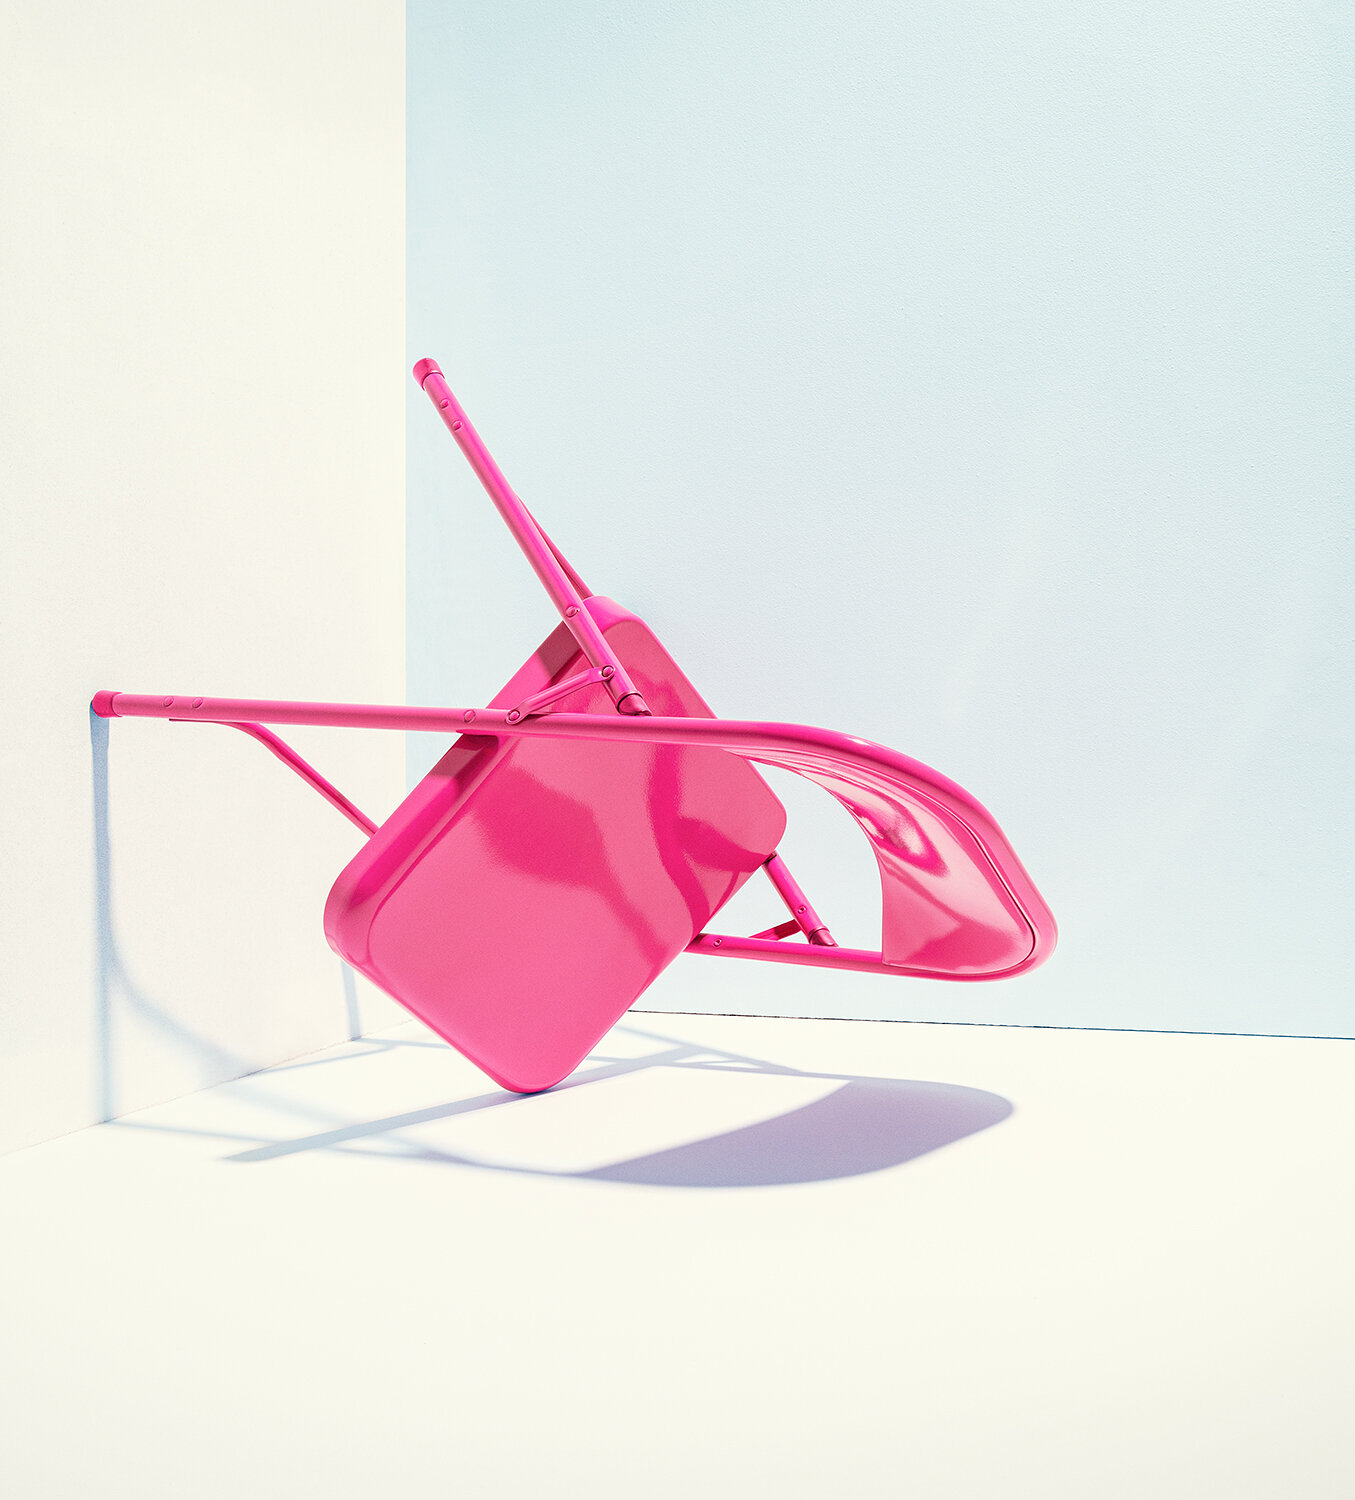  pink chair 2 